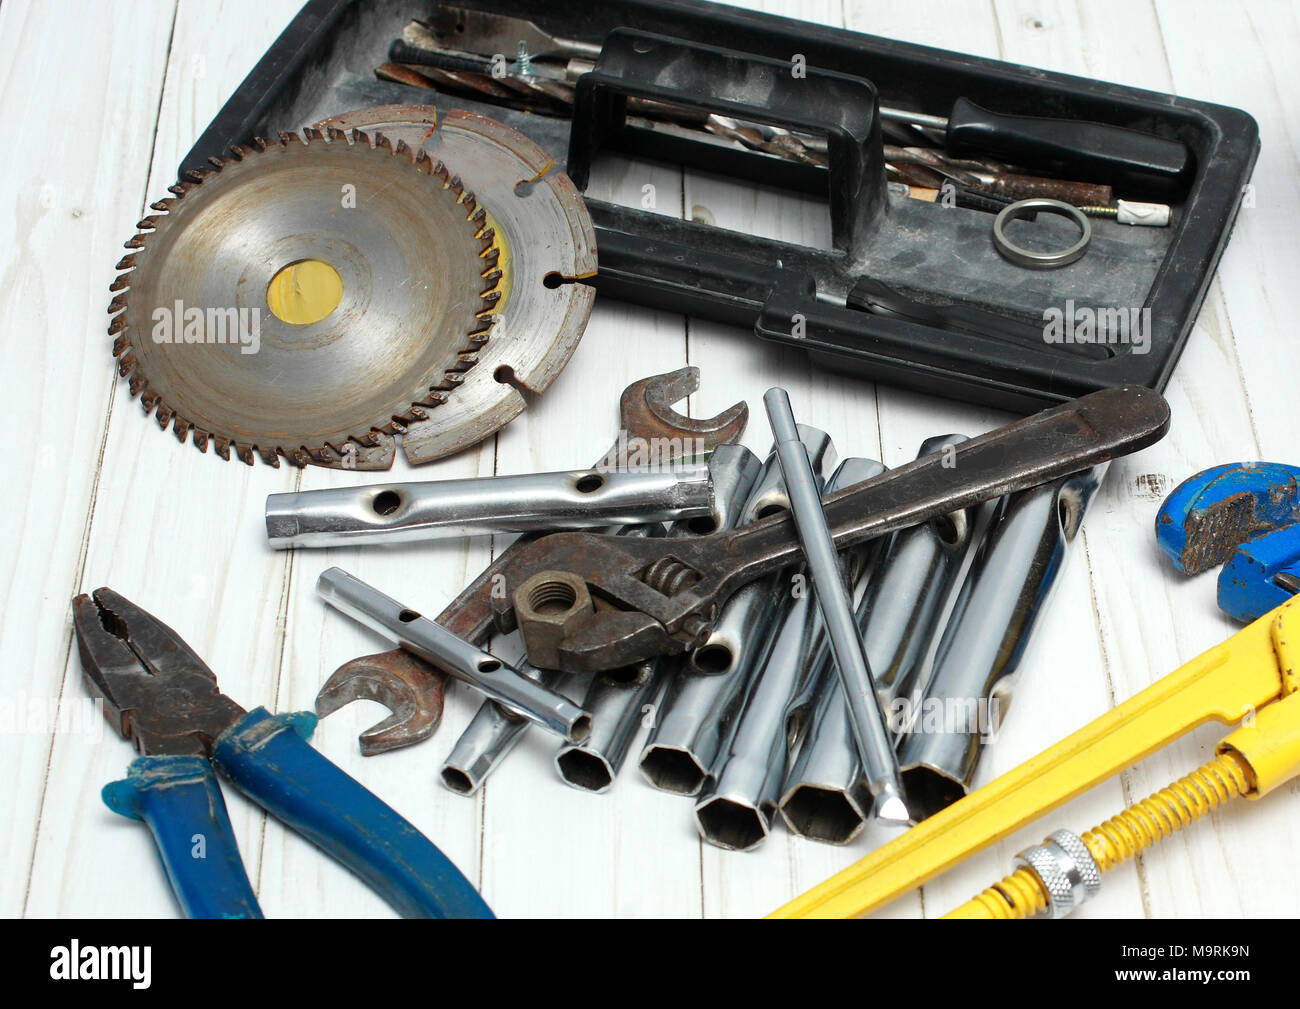 Screwdrivers, wrenches and disks lie on a wooden table. Stock Photo